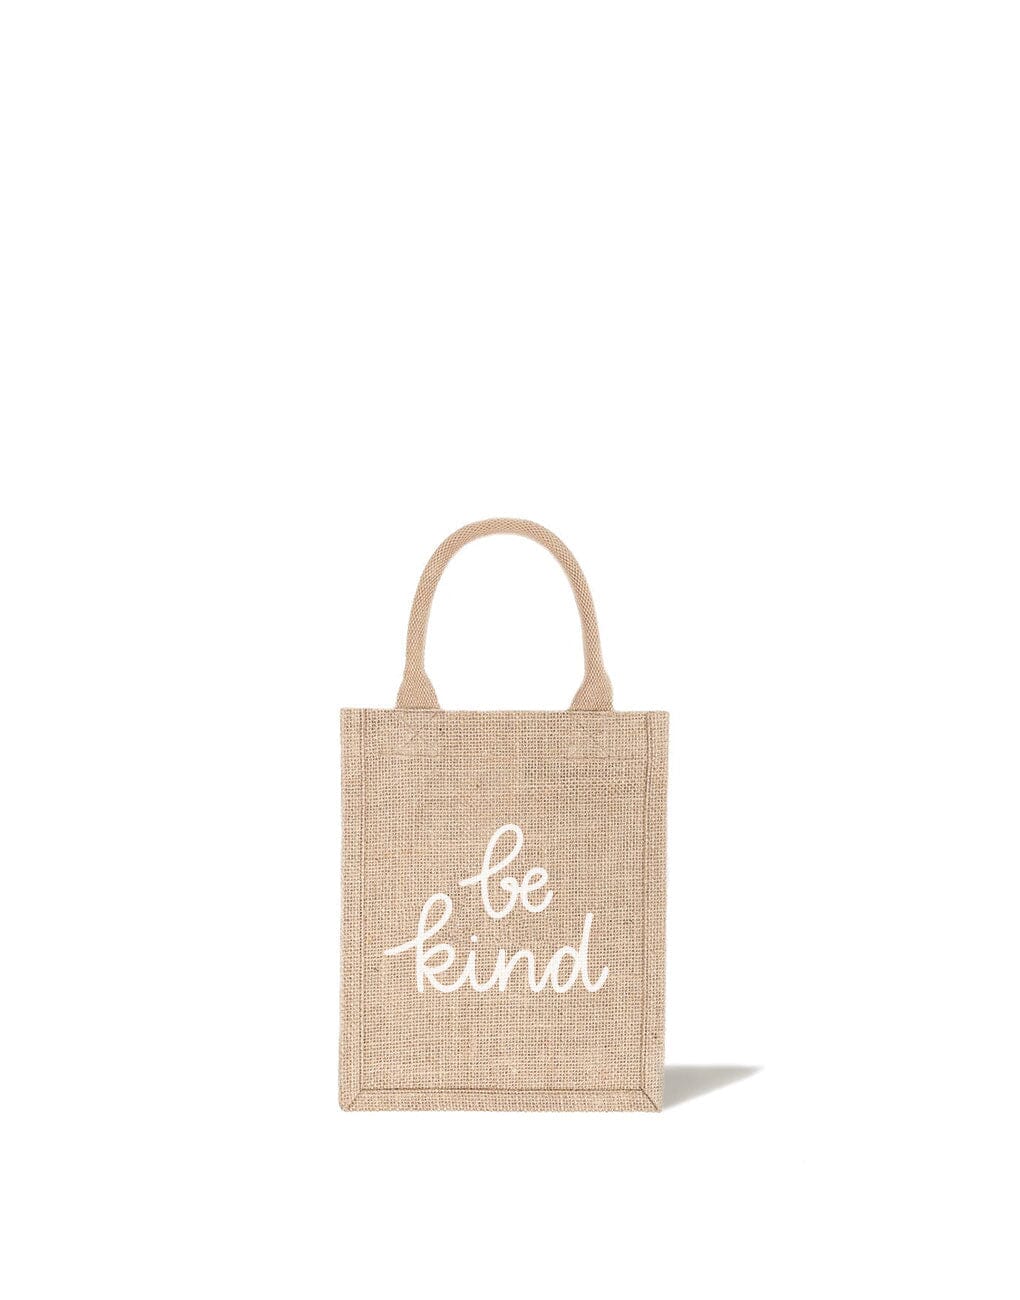 Gift Tote - Be Kind